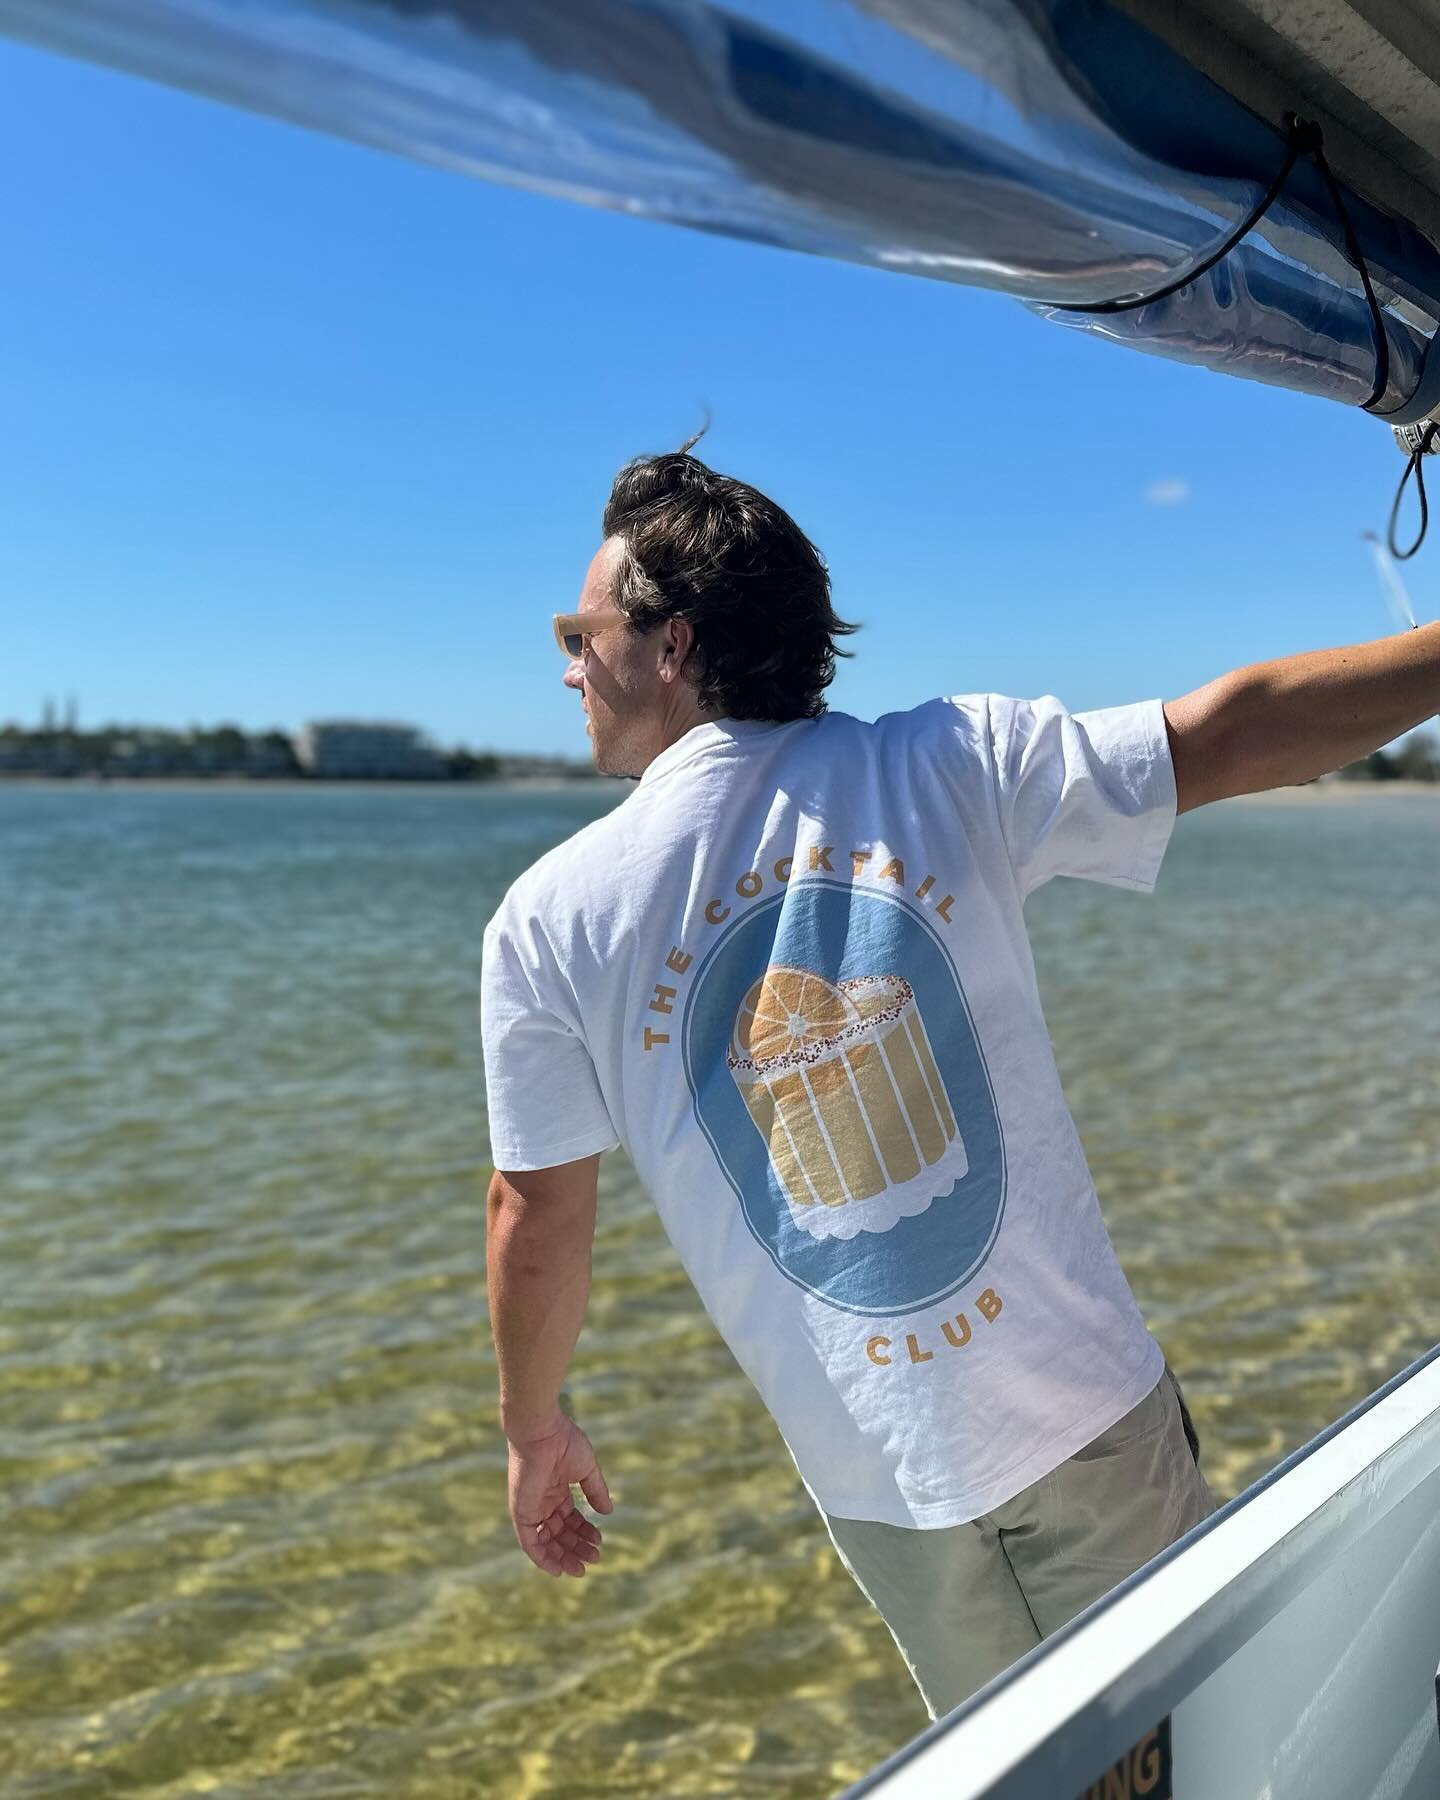 Dreaming of summer days with our Cocktail Club tee. 🌞🌊 Ready for endless sunshine and beachside cheers. Where will you take yours? #SummerDreaming #CocktailClubTees